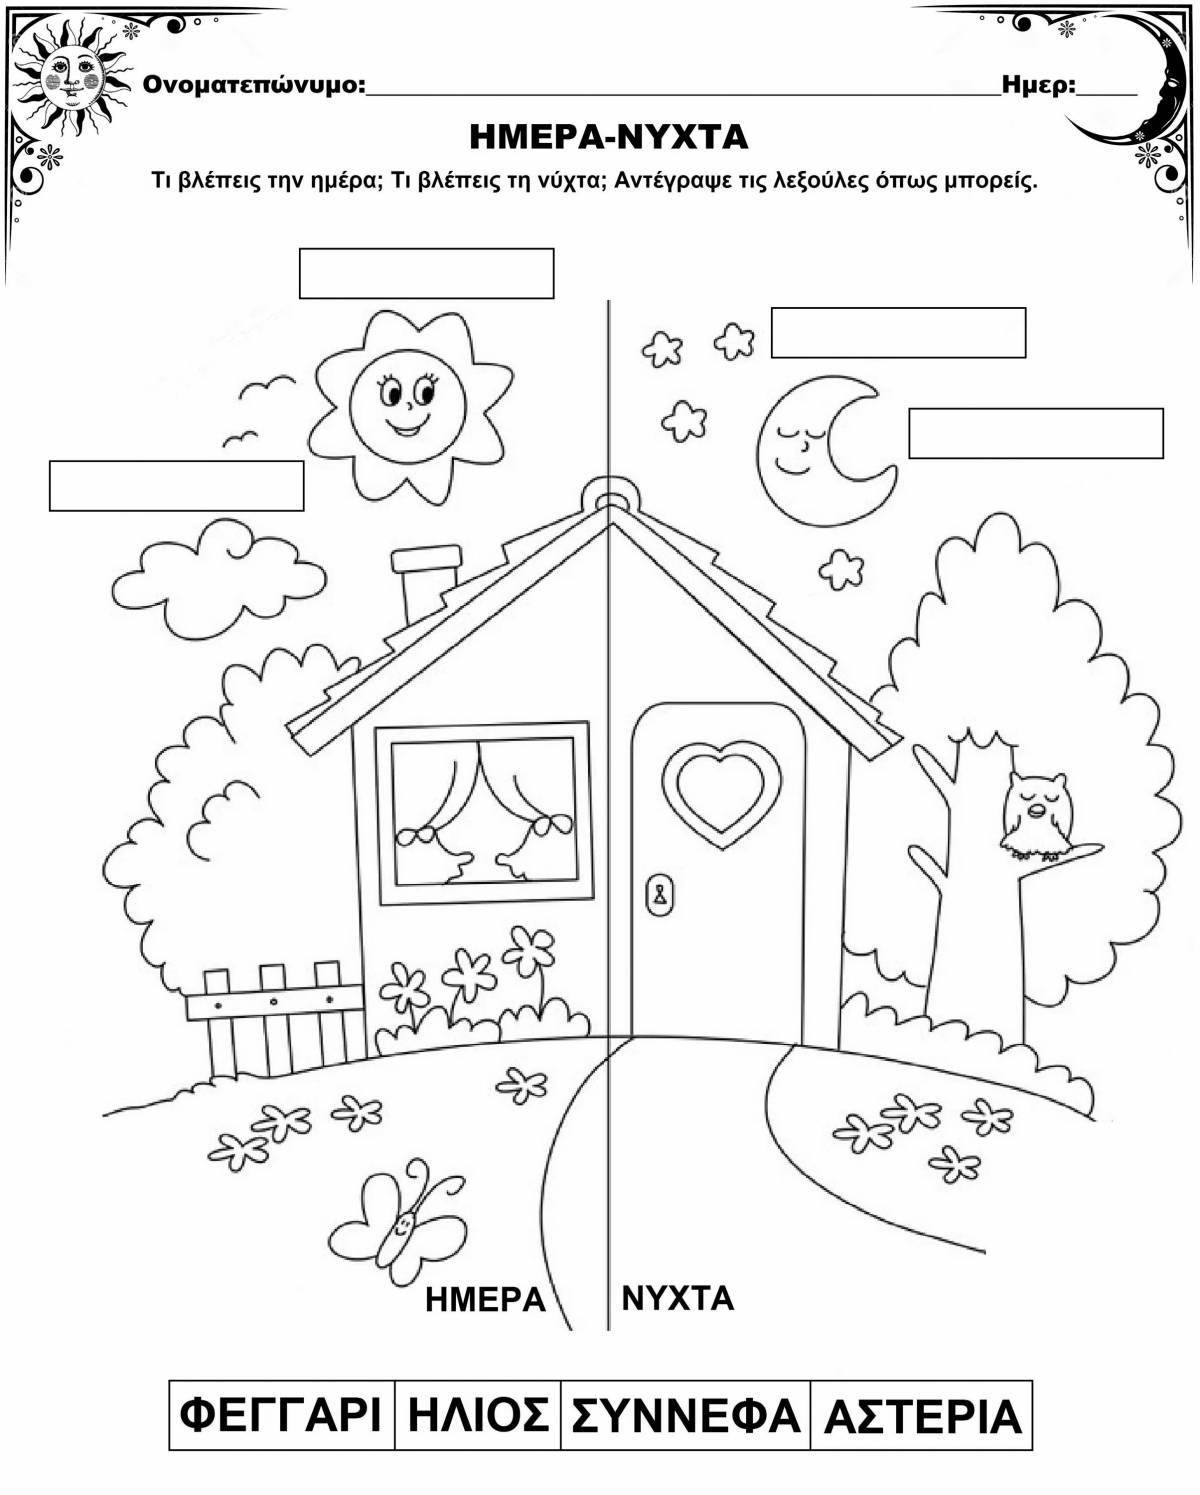 Fun time of day coloring book for kids